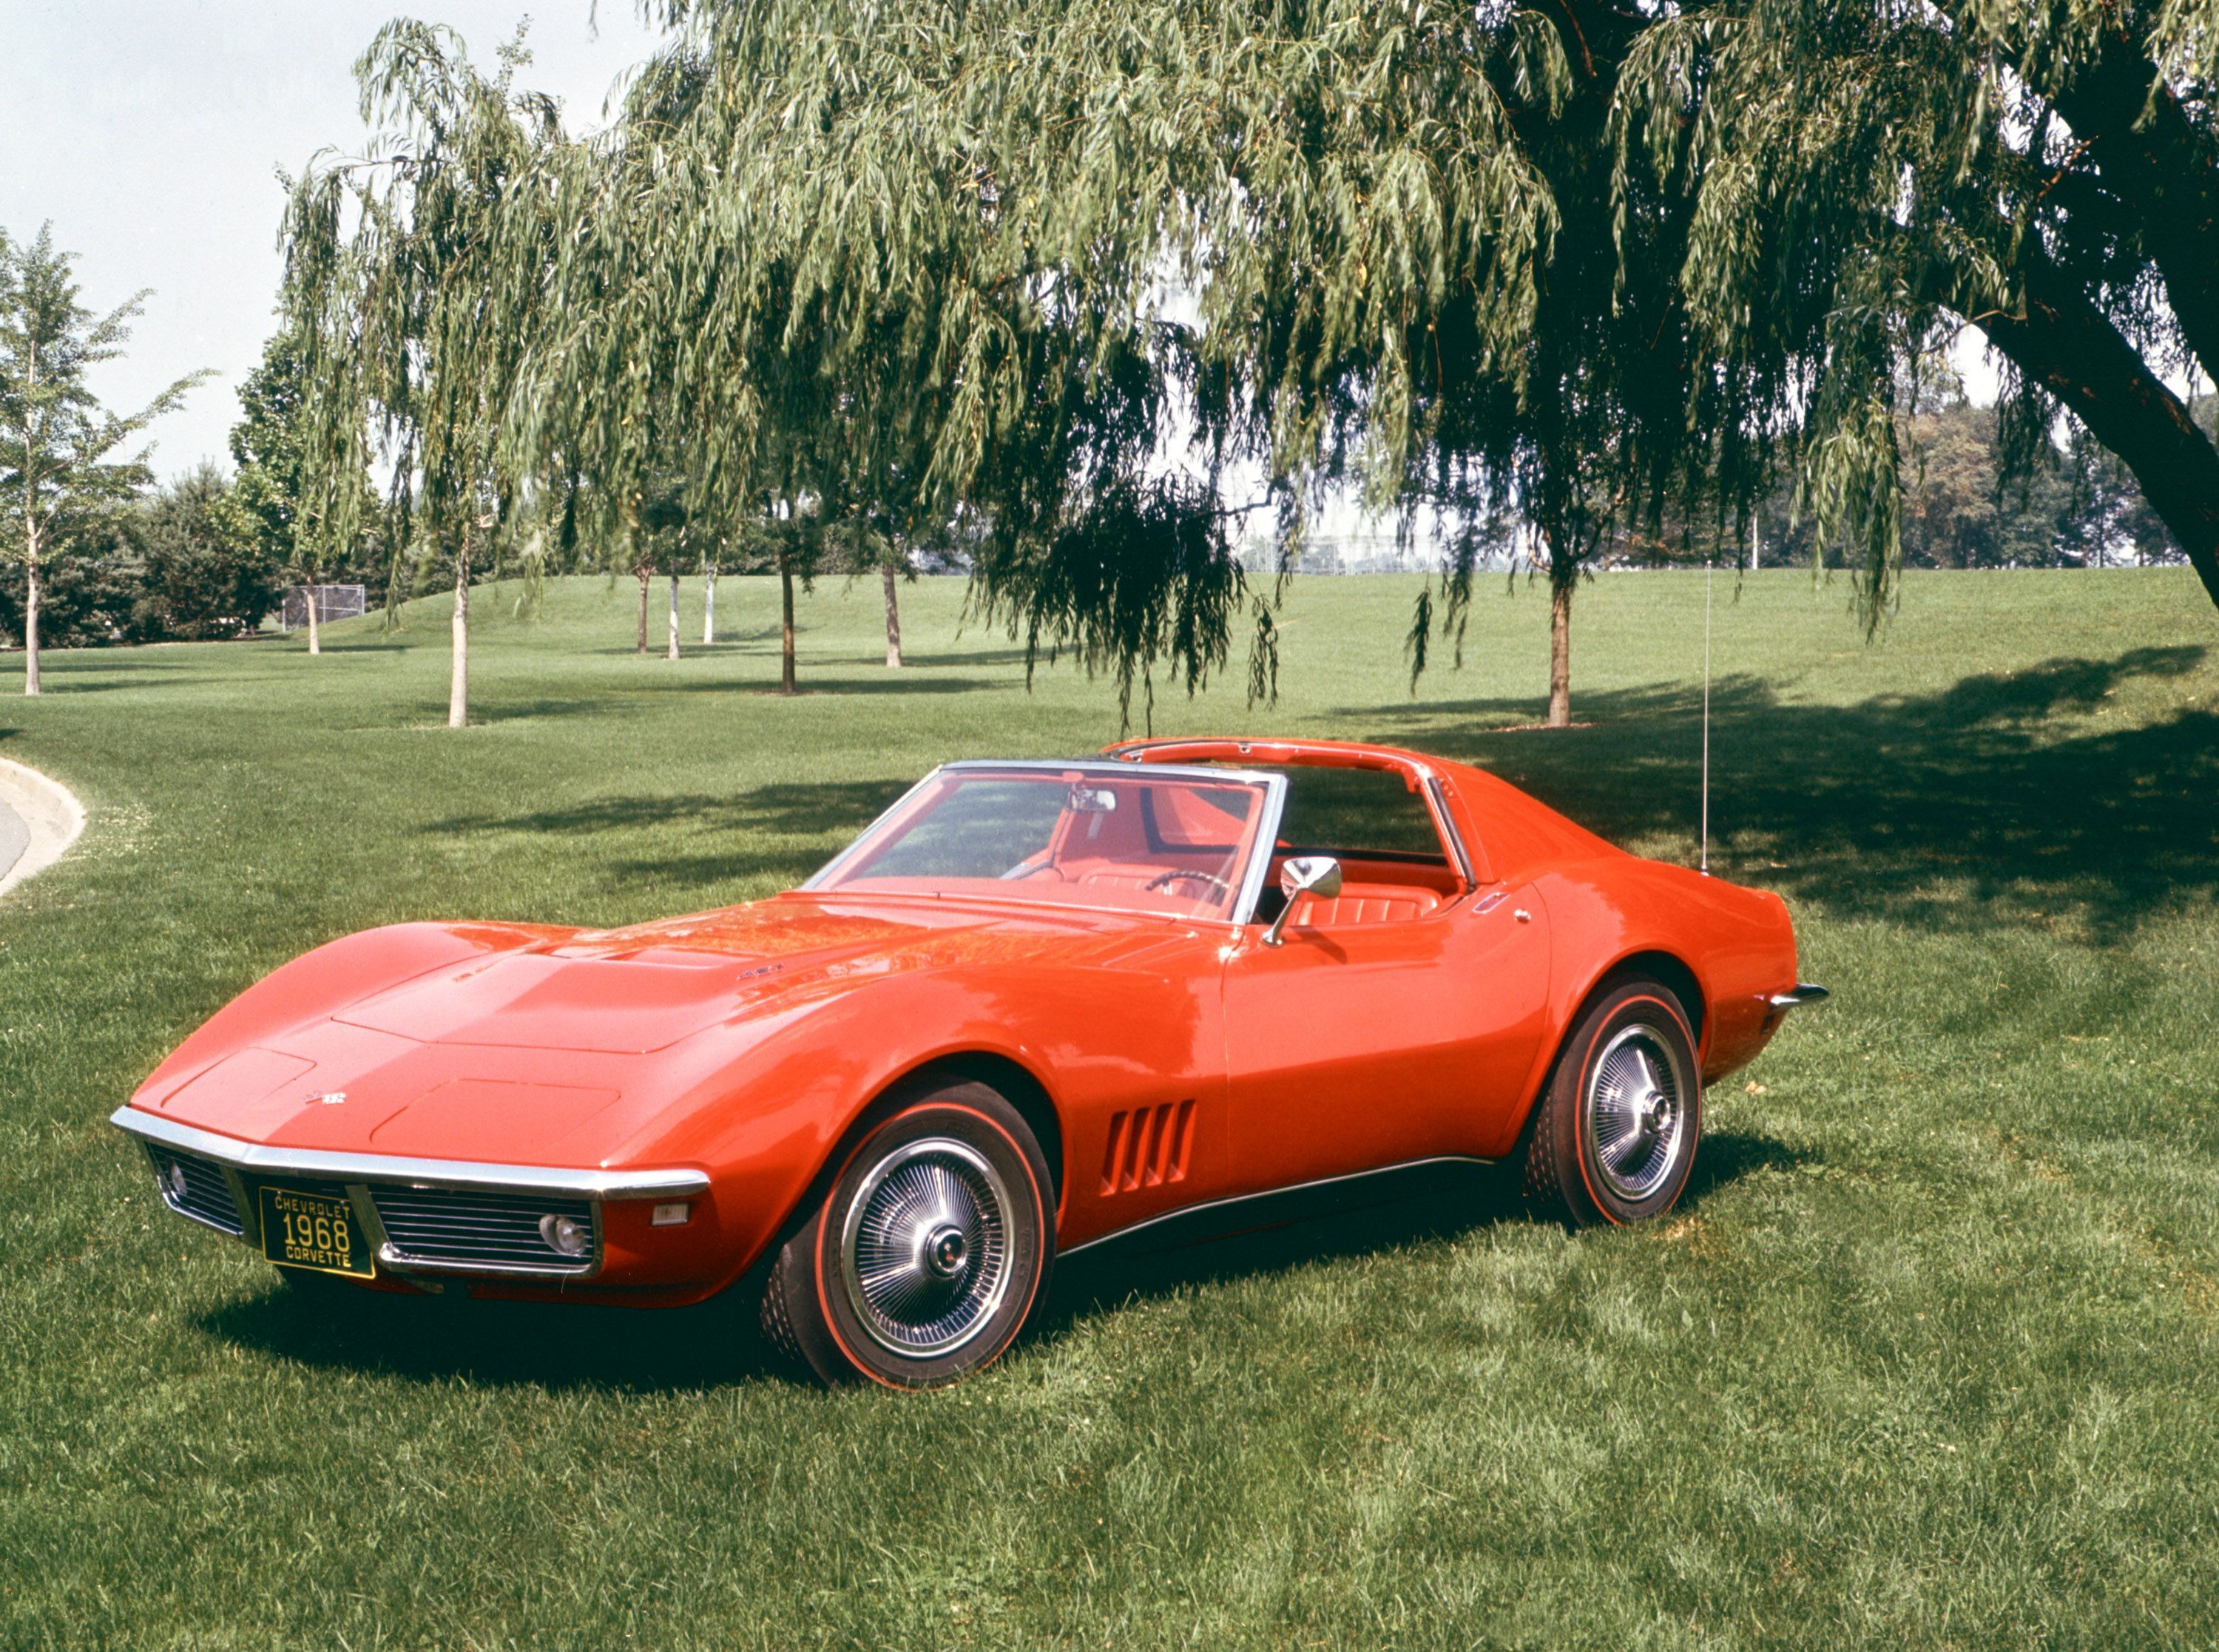 classic Chevrolet Corvette parked on a field